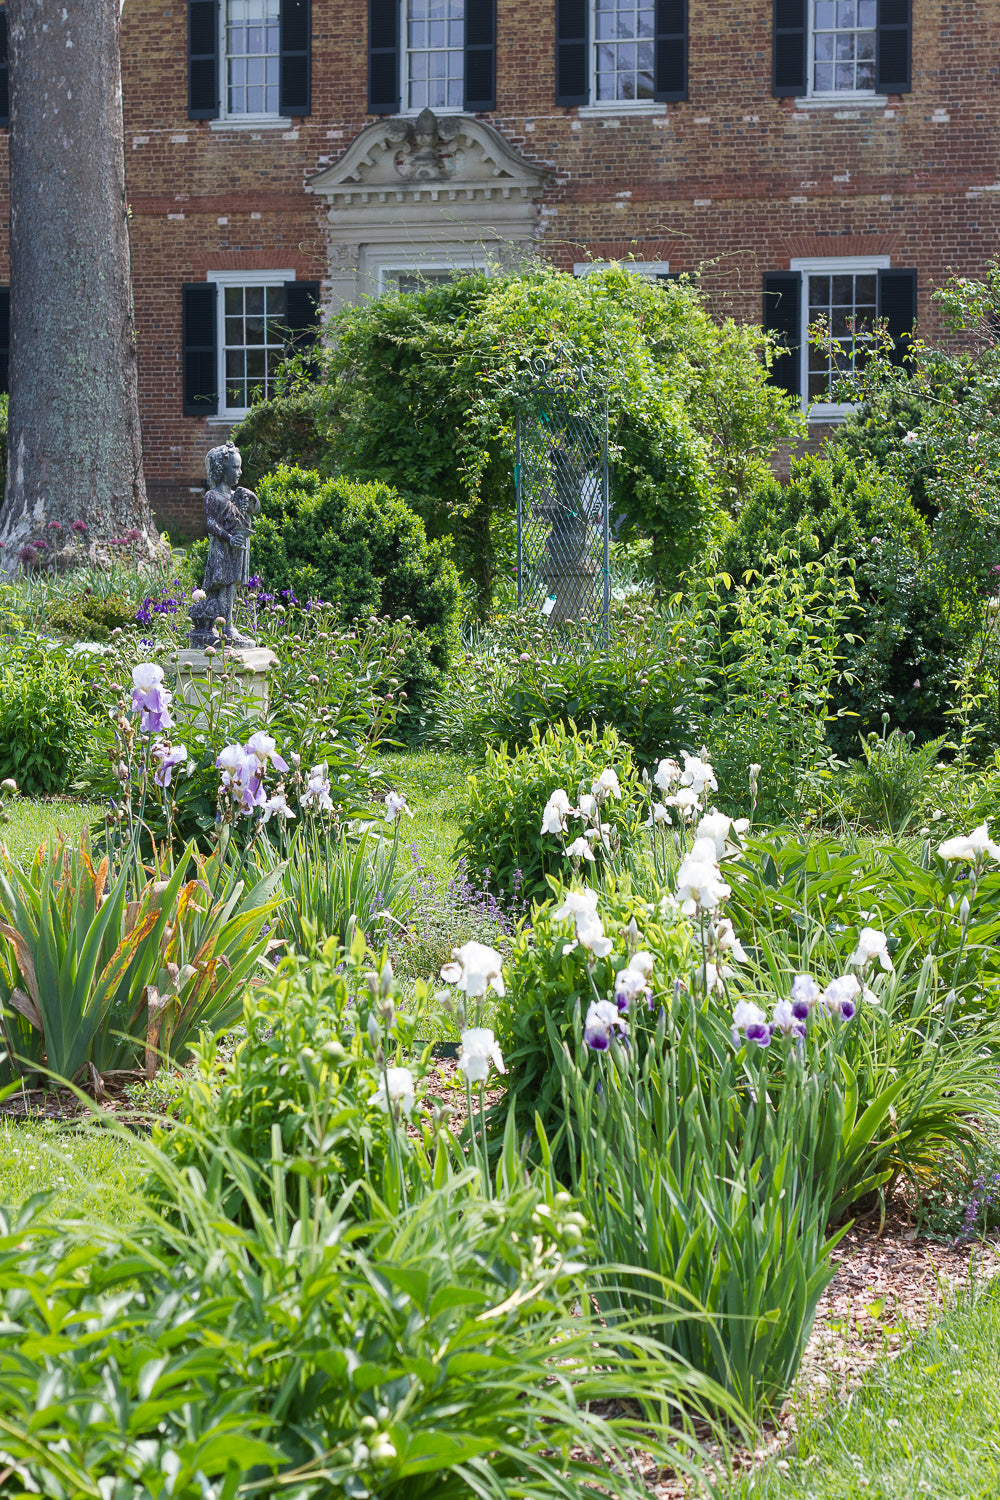 Chatham Manor historic house and gardens